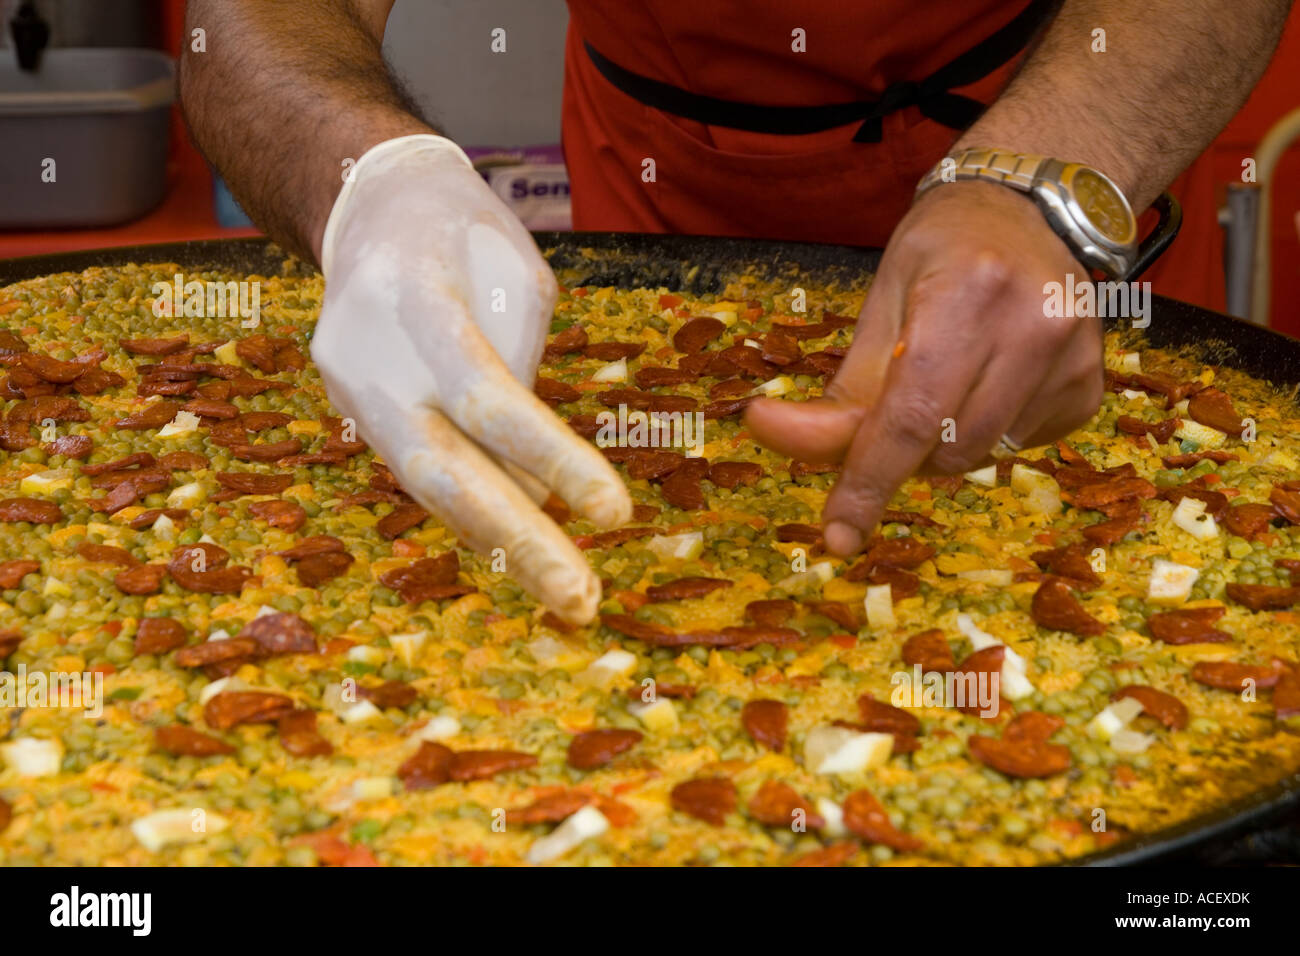 Spanish dish Paella being made at the 'Continental Market' in Dundee, UK Stock Photo